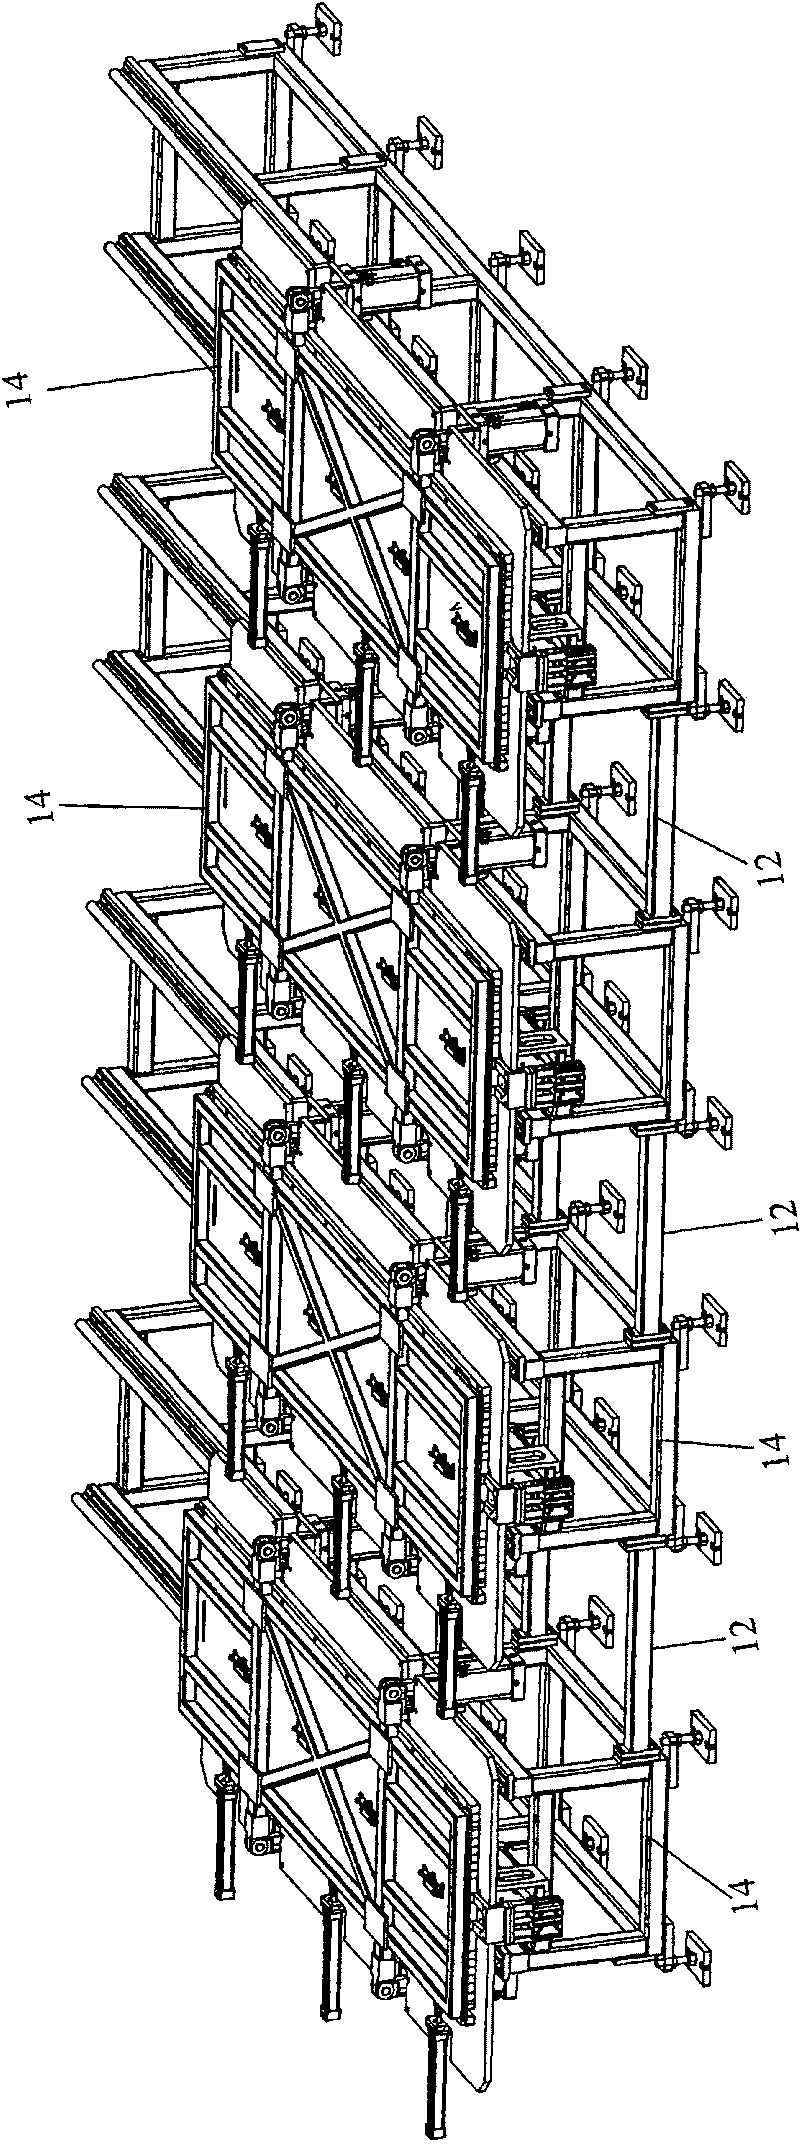 Continuous production method of foam filling panel